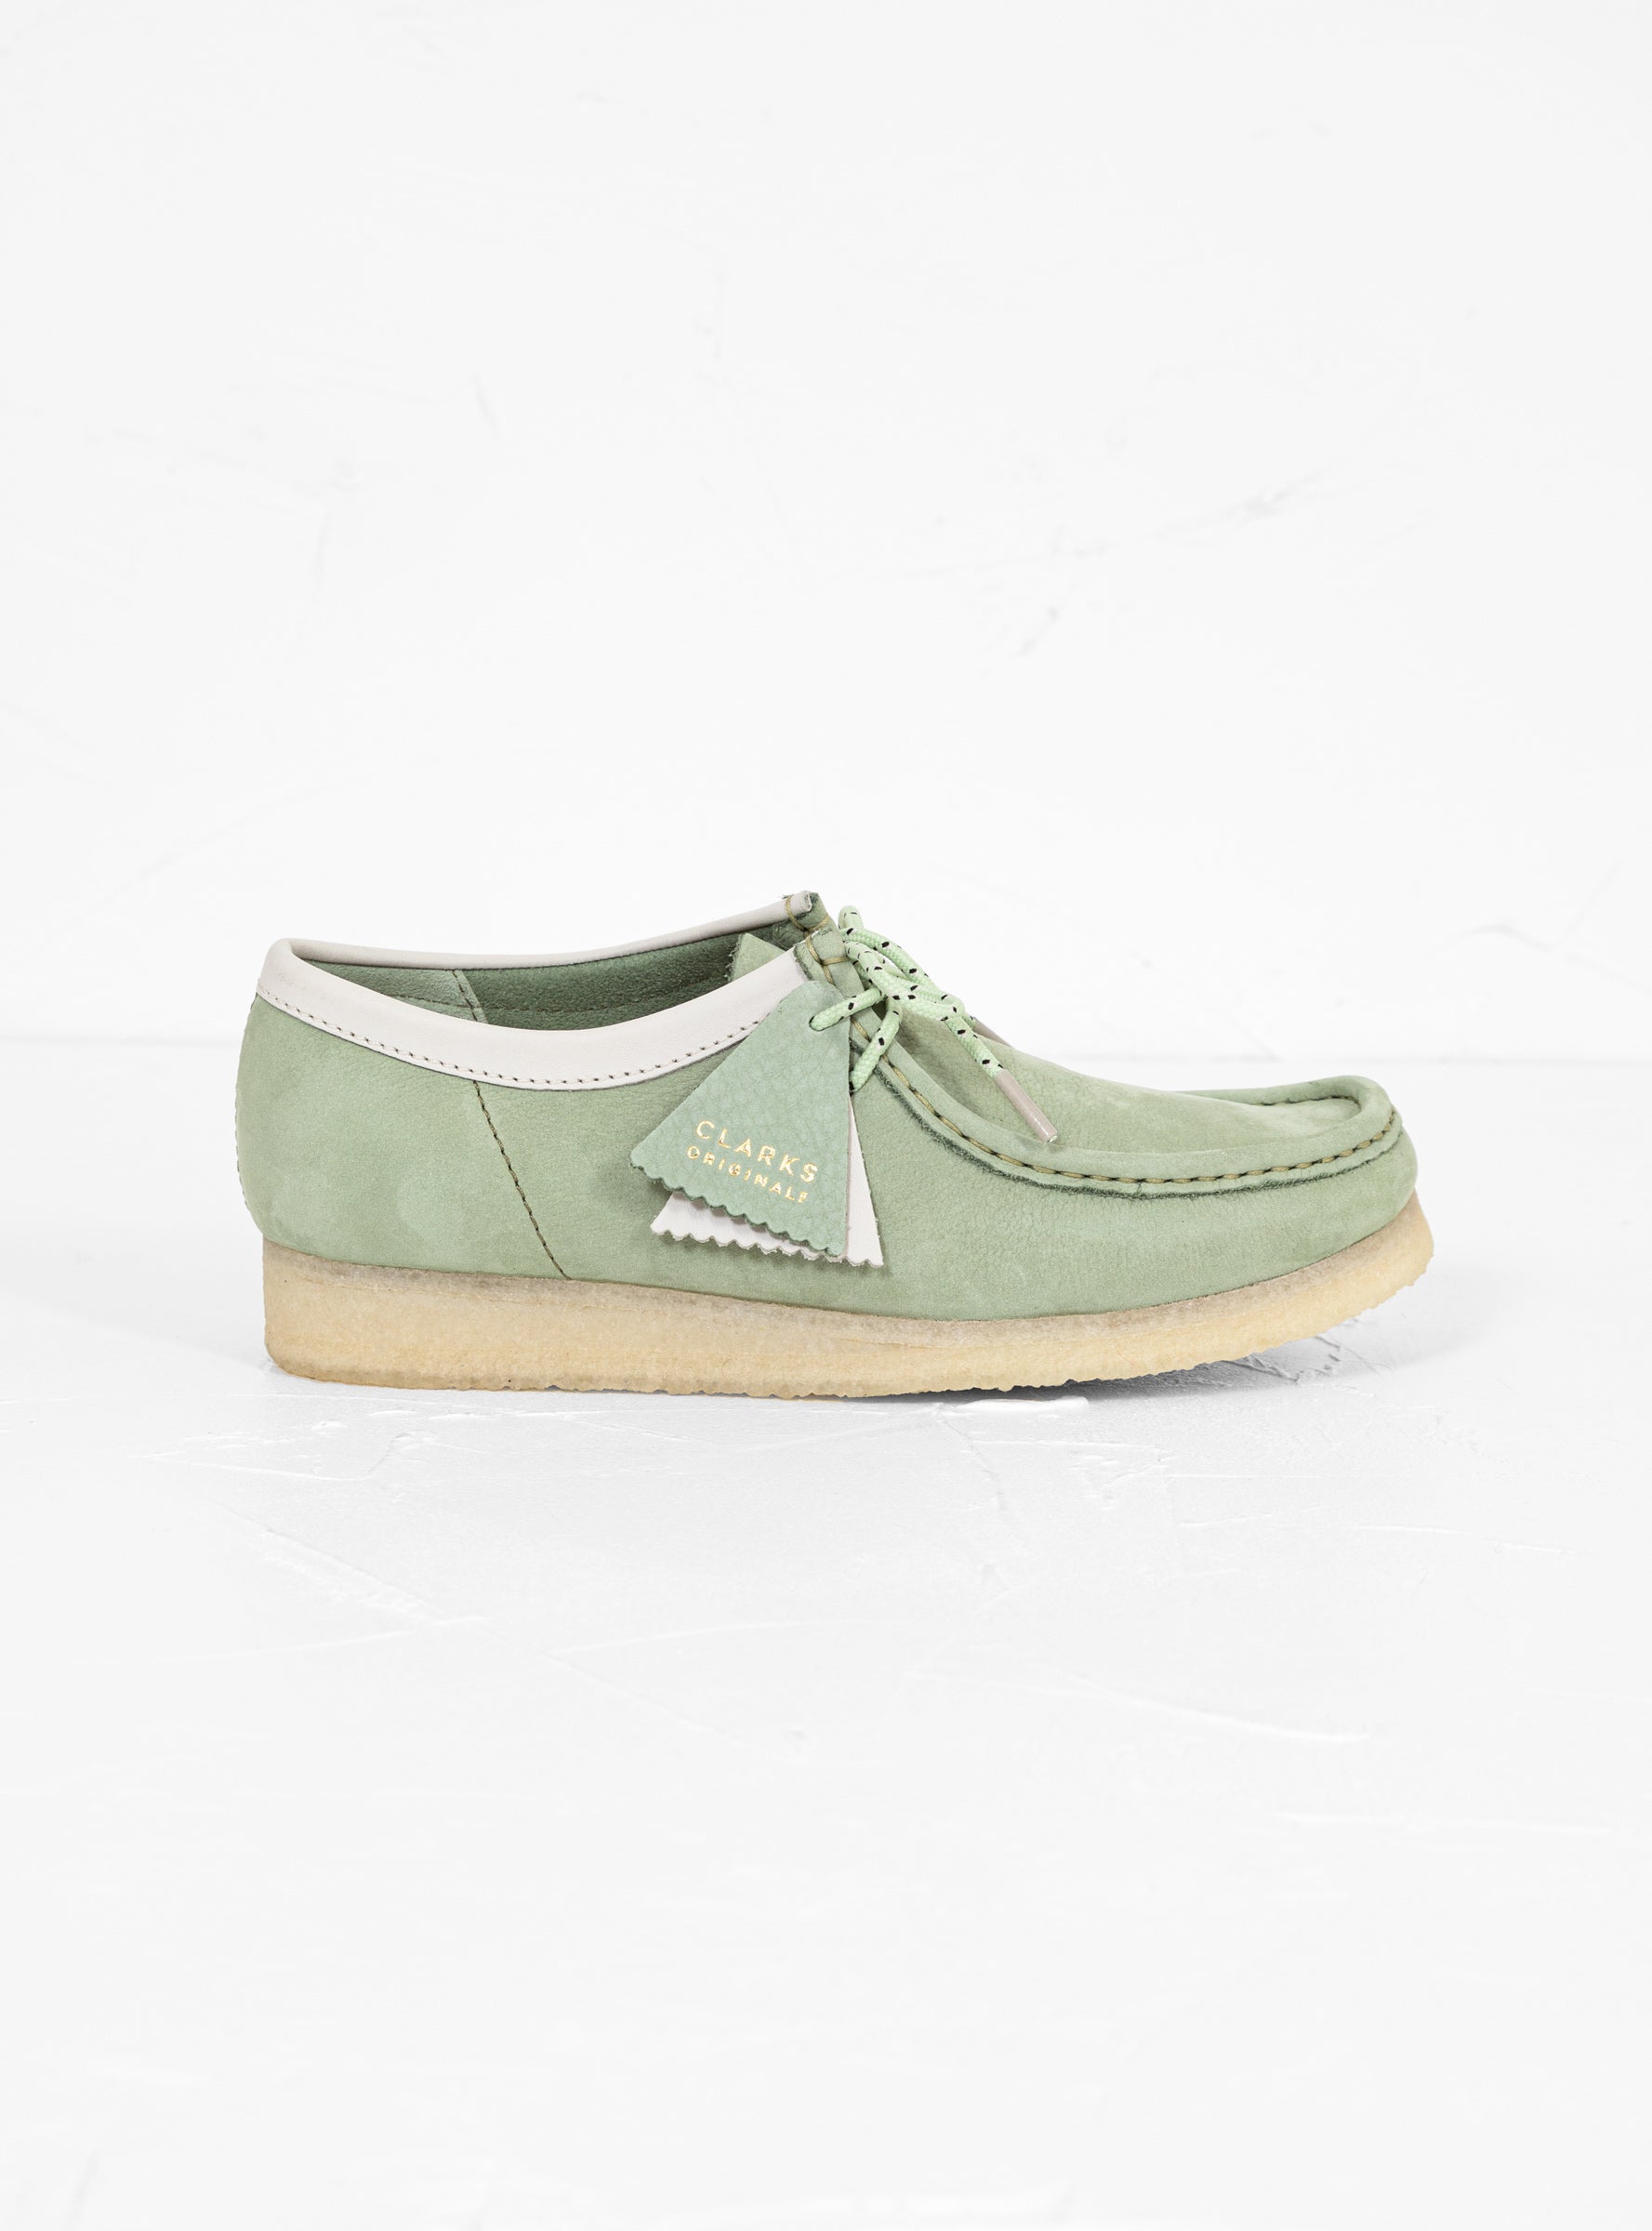 Gravere Mindful Tæller insekter Wallabee Shoes Pale Green Nubuck by Clarks Originals | Couverture & The  Garbstore